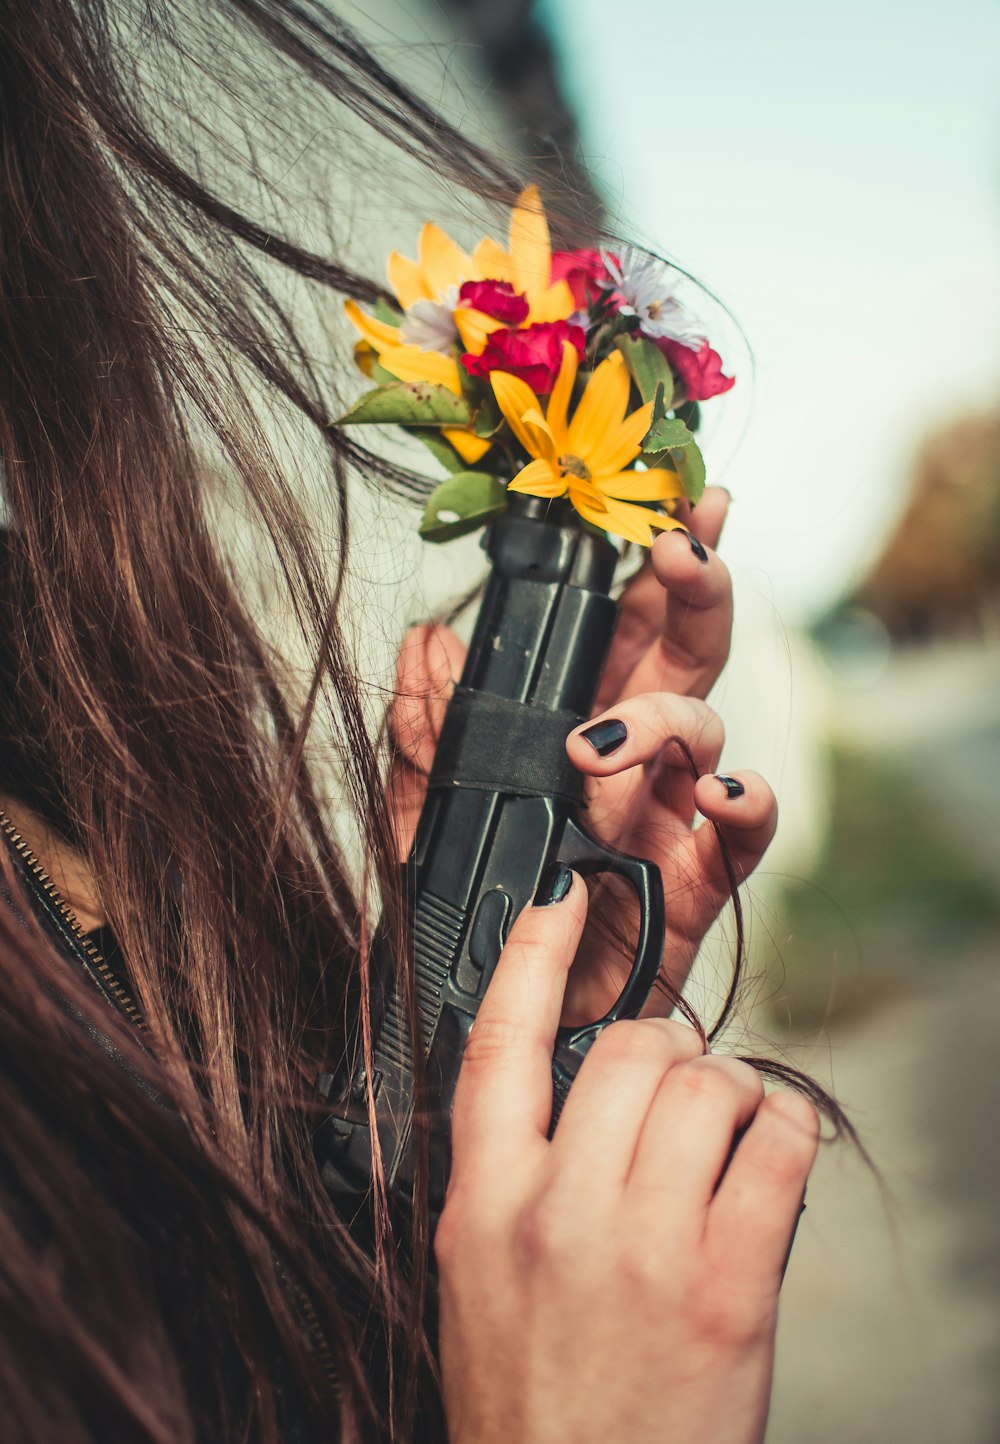 person holding automatic pistol with multicolored flowers on tip